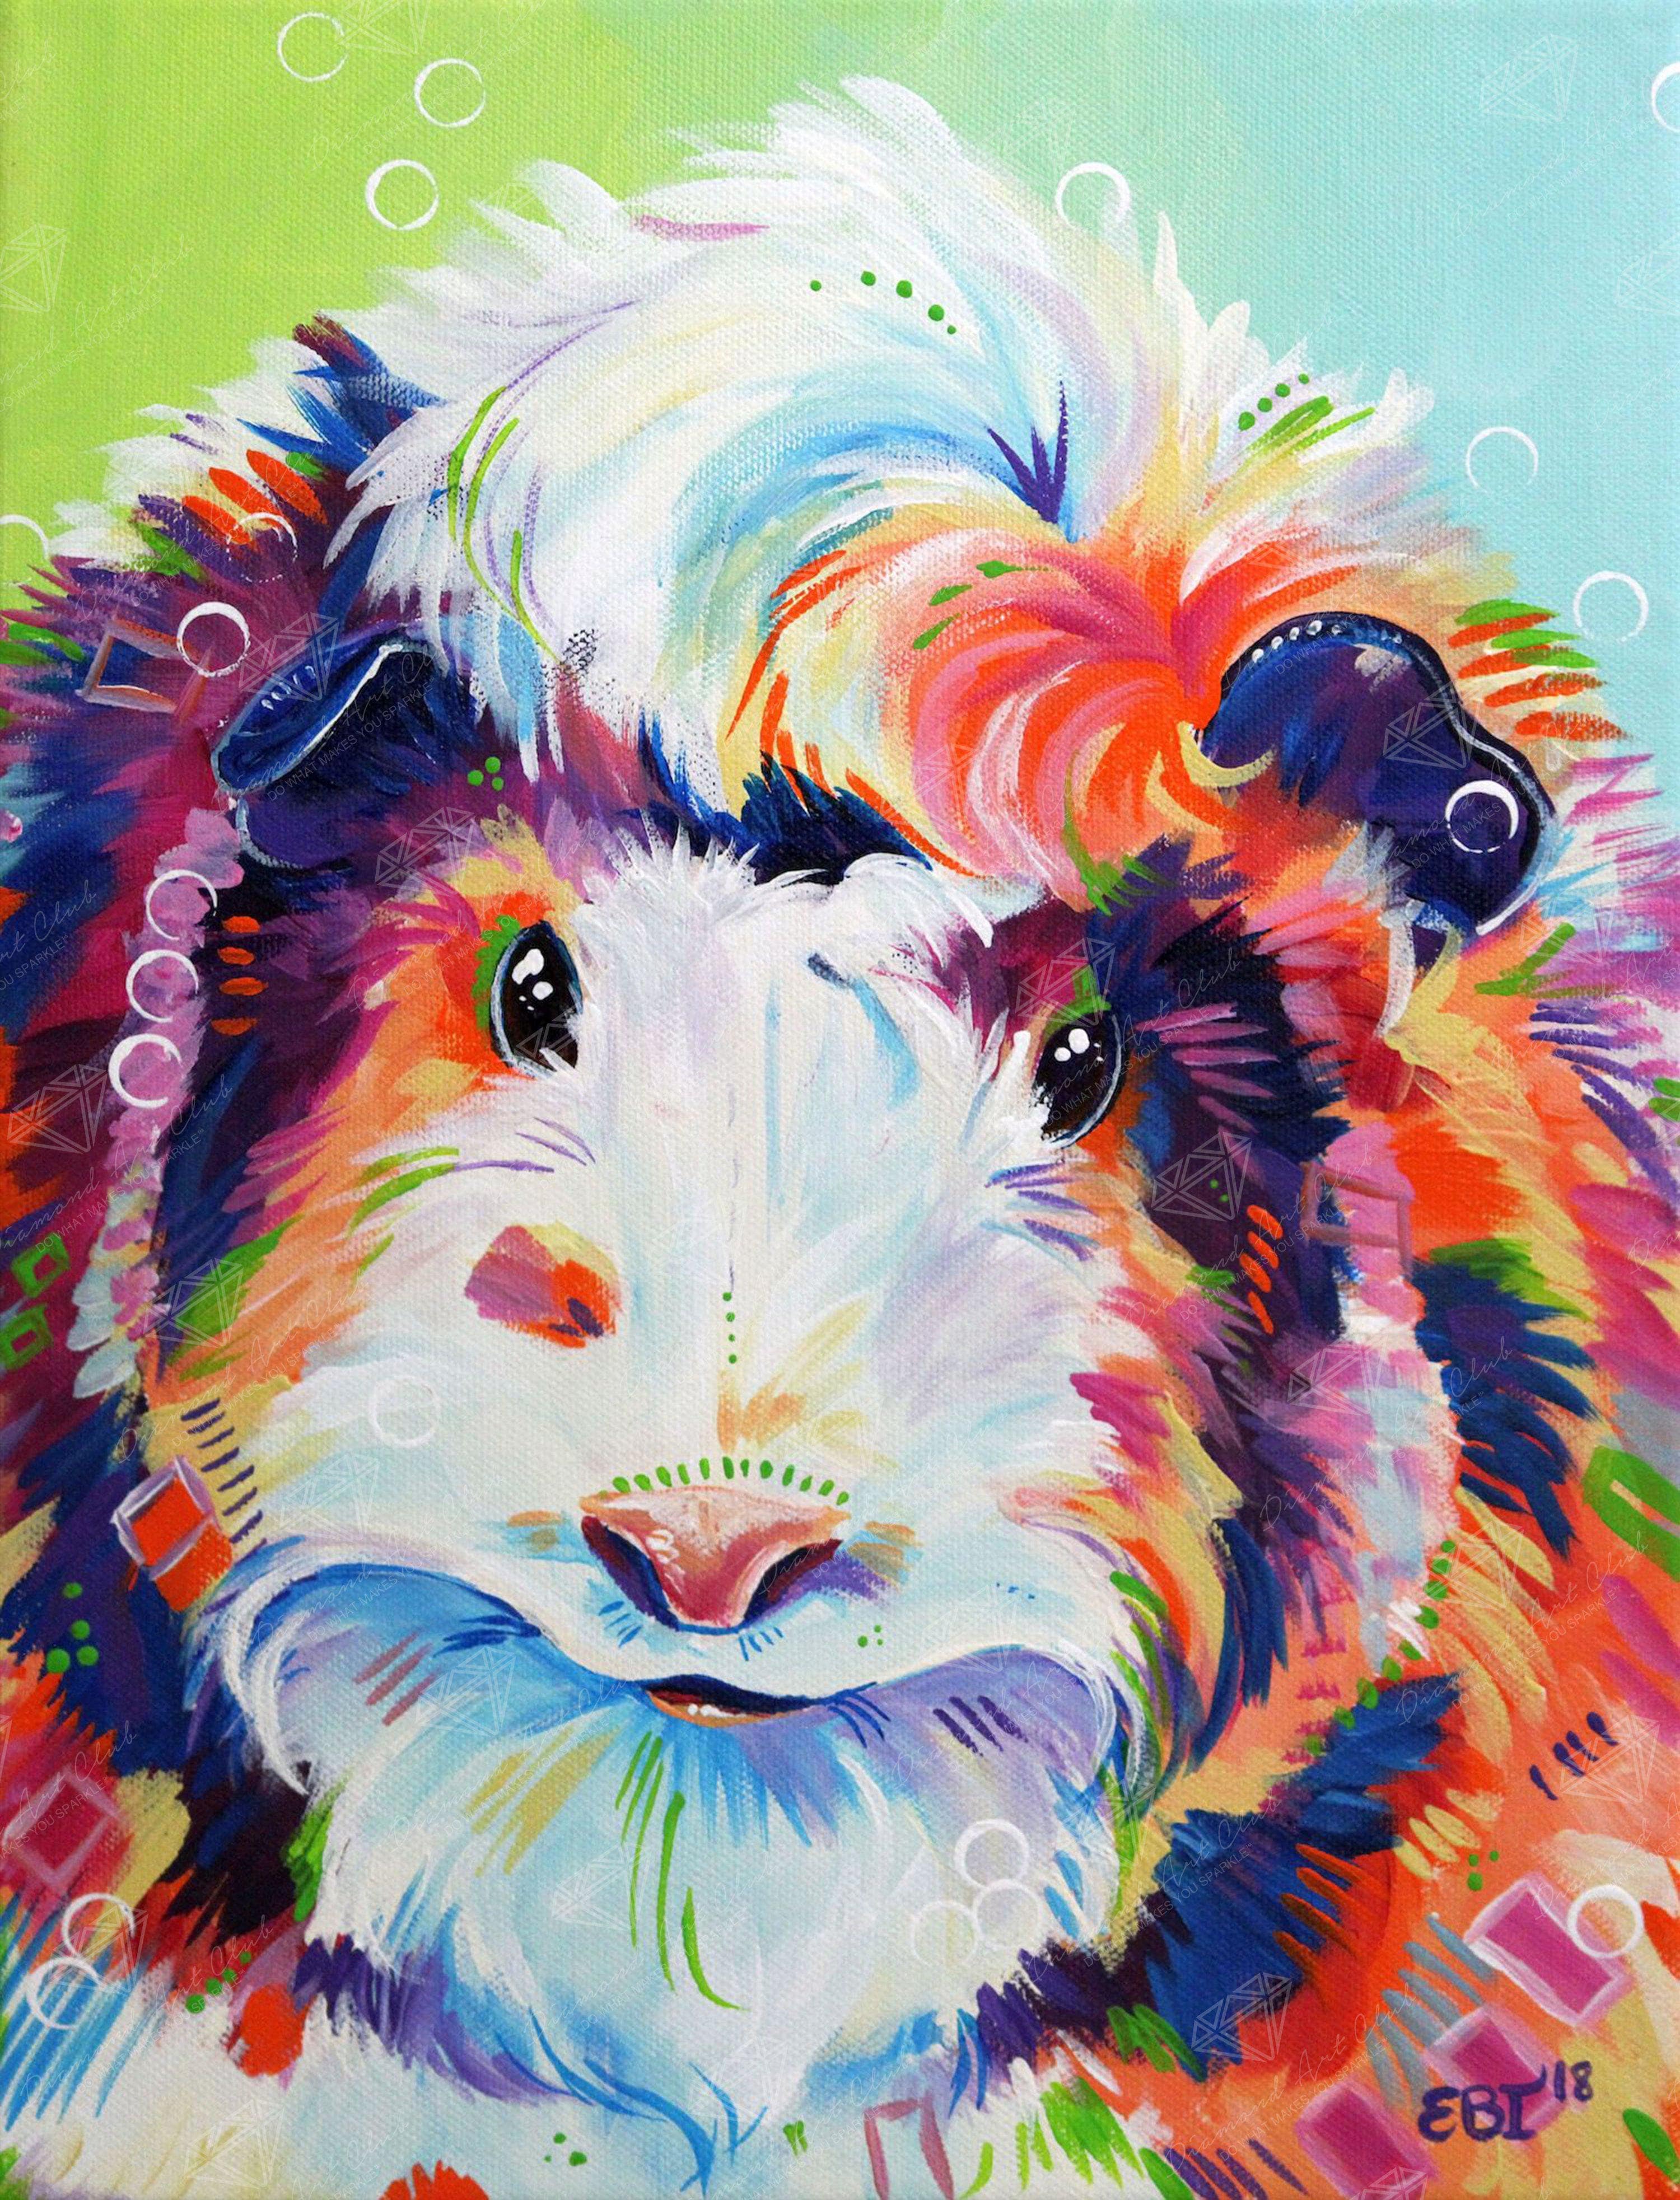 Lianpo Diamond Painting Cute Guinea Pig DIY 5D Full Drill Diamond Painting Kits for Kids Cavia Porcellus Paint by Diamonds for Adults Round